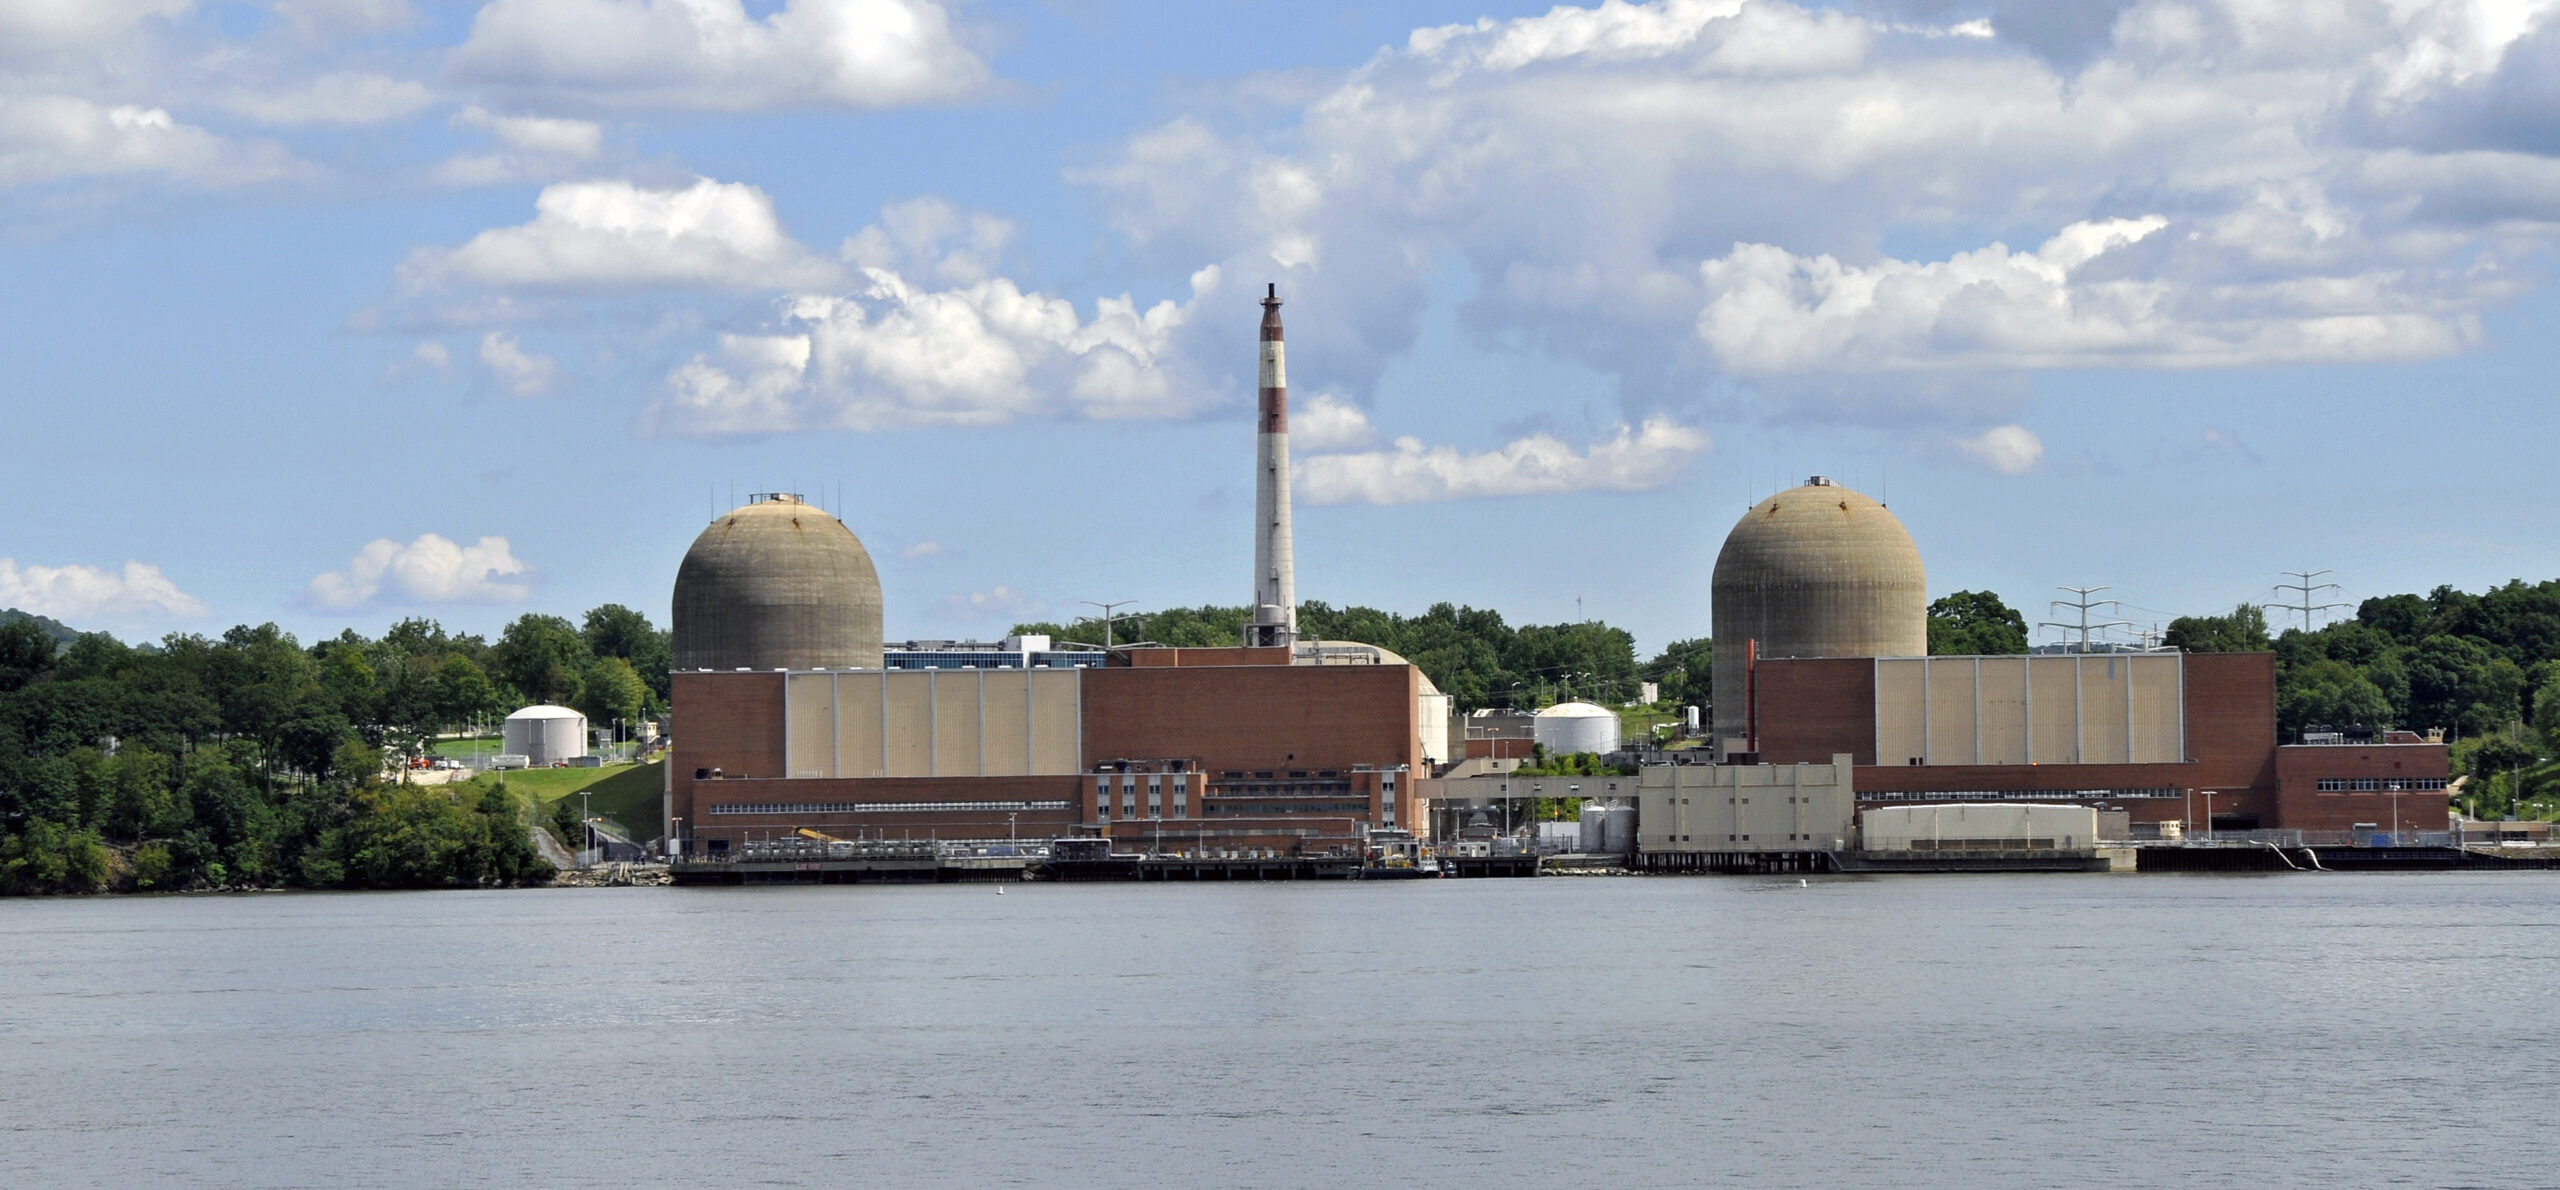 What You Need To Know About Indian Point Nuclear Plant’s Groundwater Alert